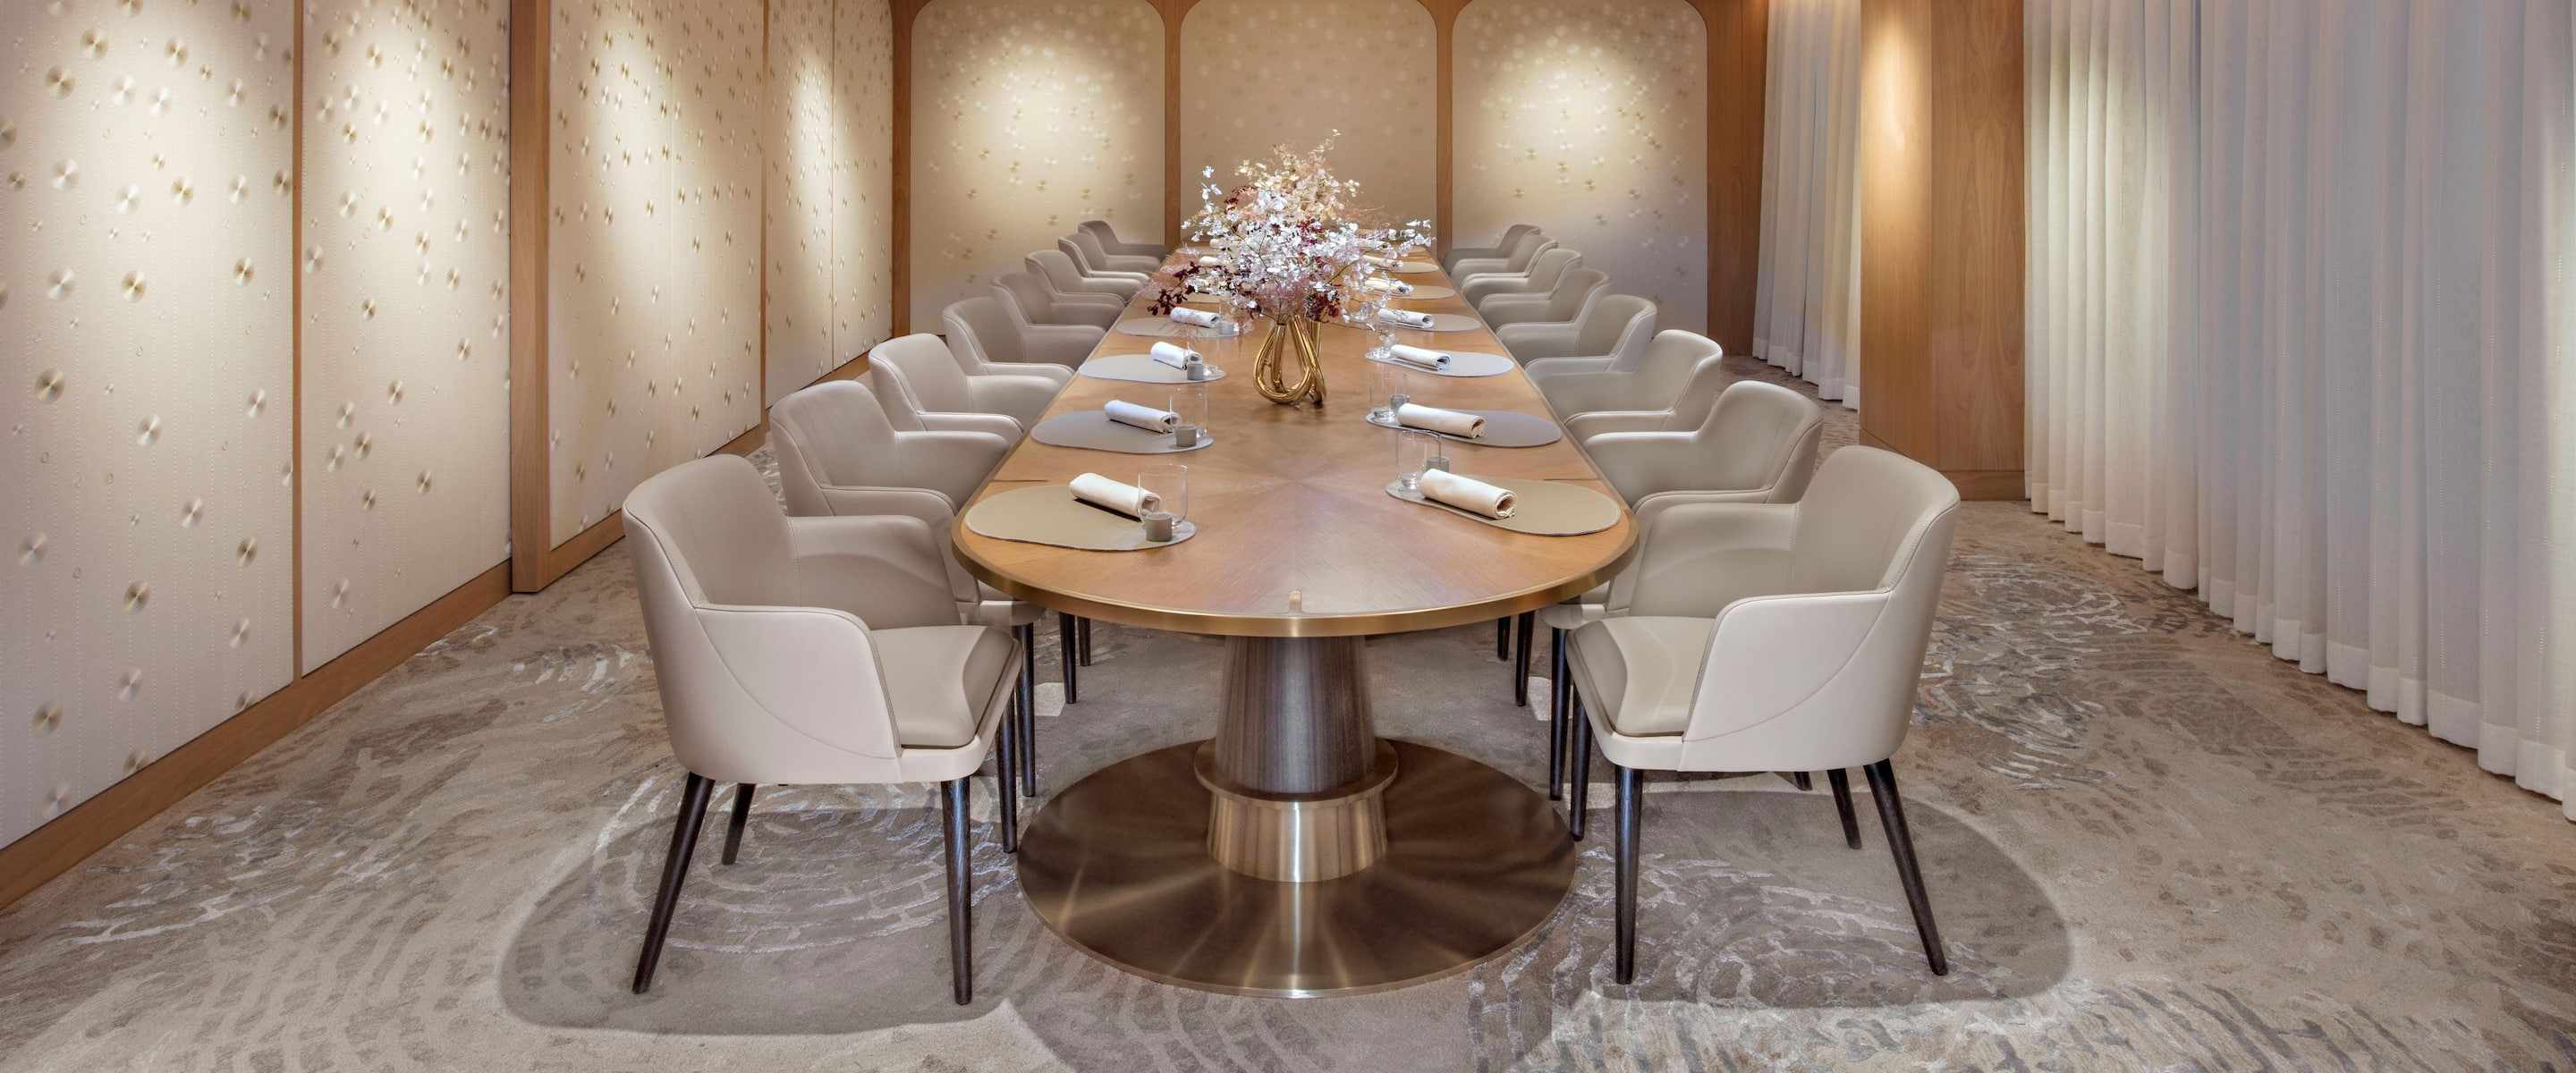 golden lit private dining room with long table surrounded by chairs